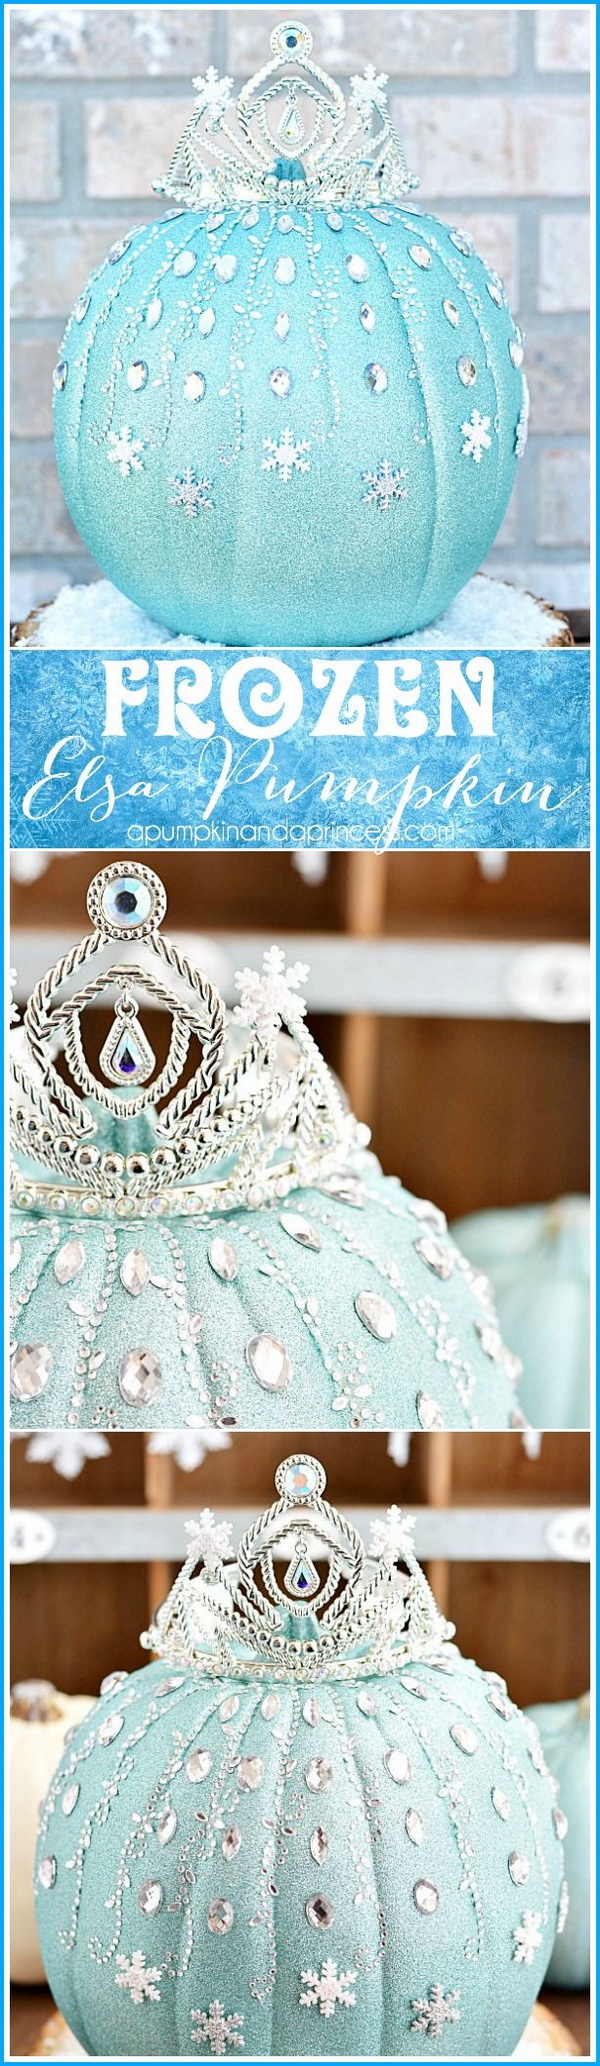 DIY No Carving Frozen Elsa Pumpkin. Oh, my word! This frozen Elsa pumpkin is seriously adorable! And it's much more easy to decorate than you may think. 